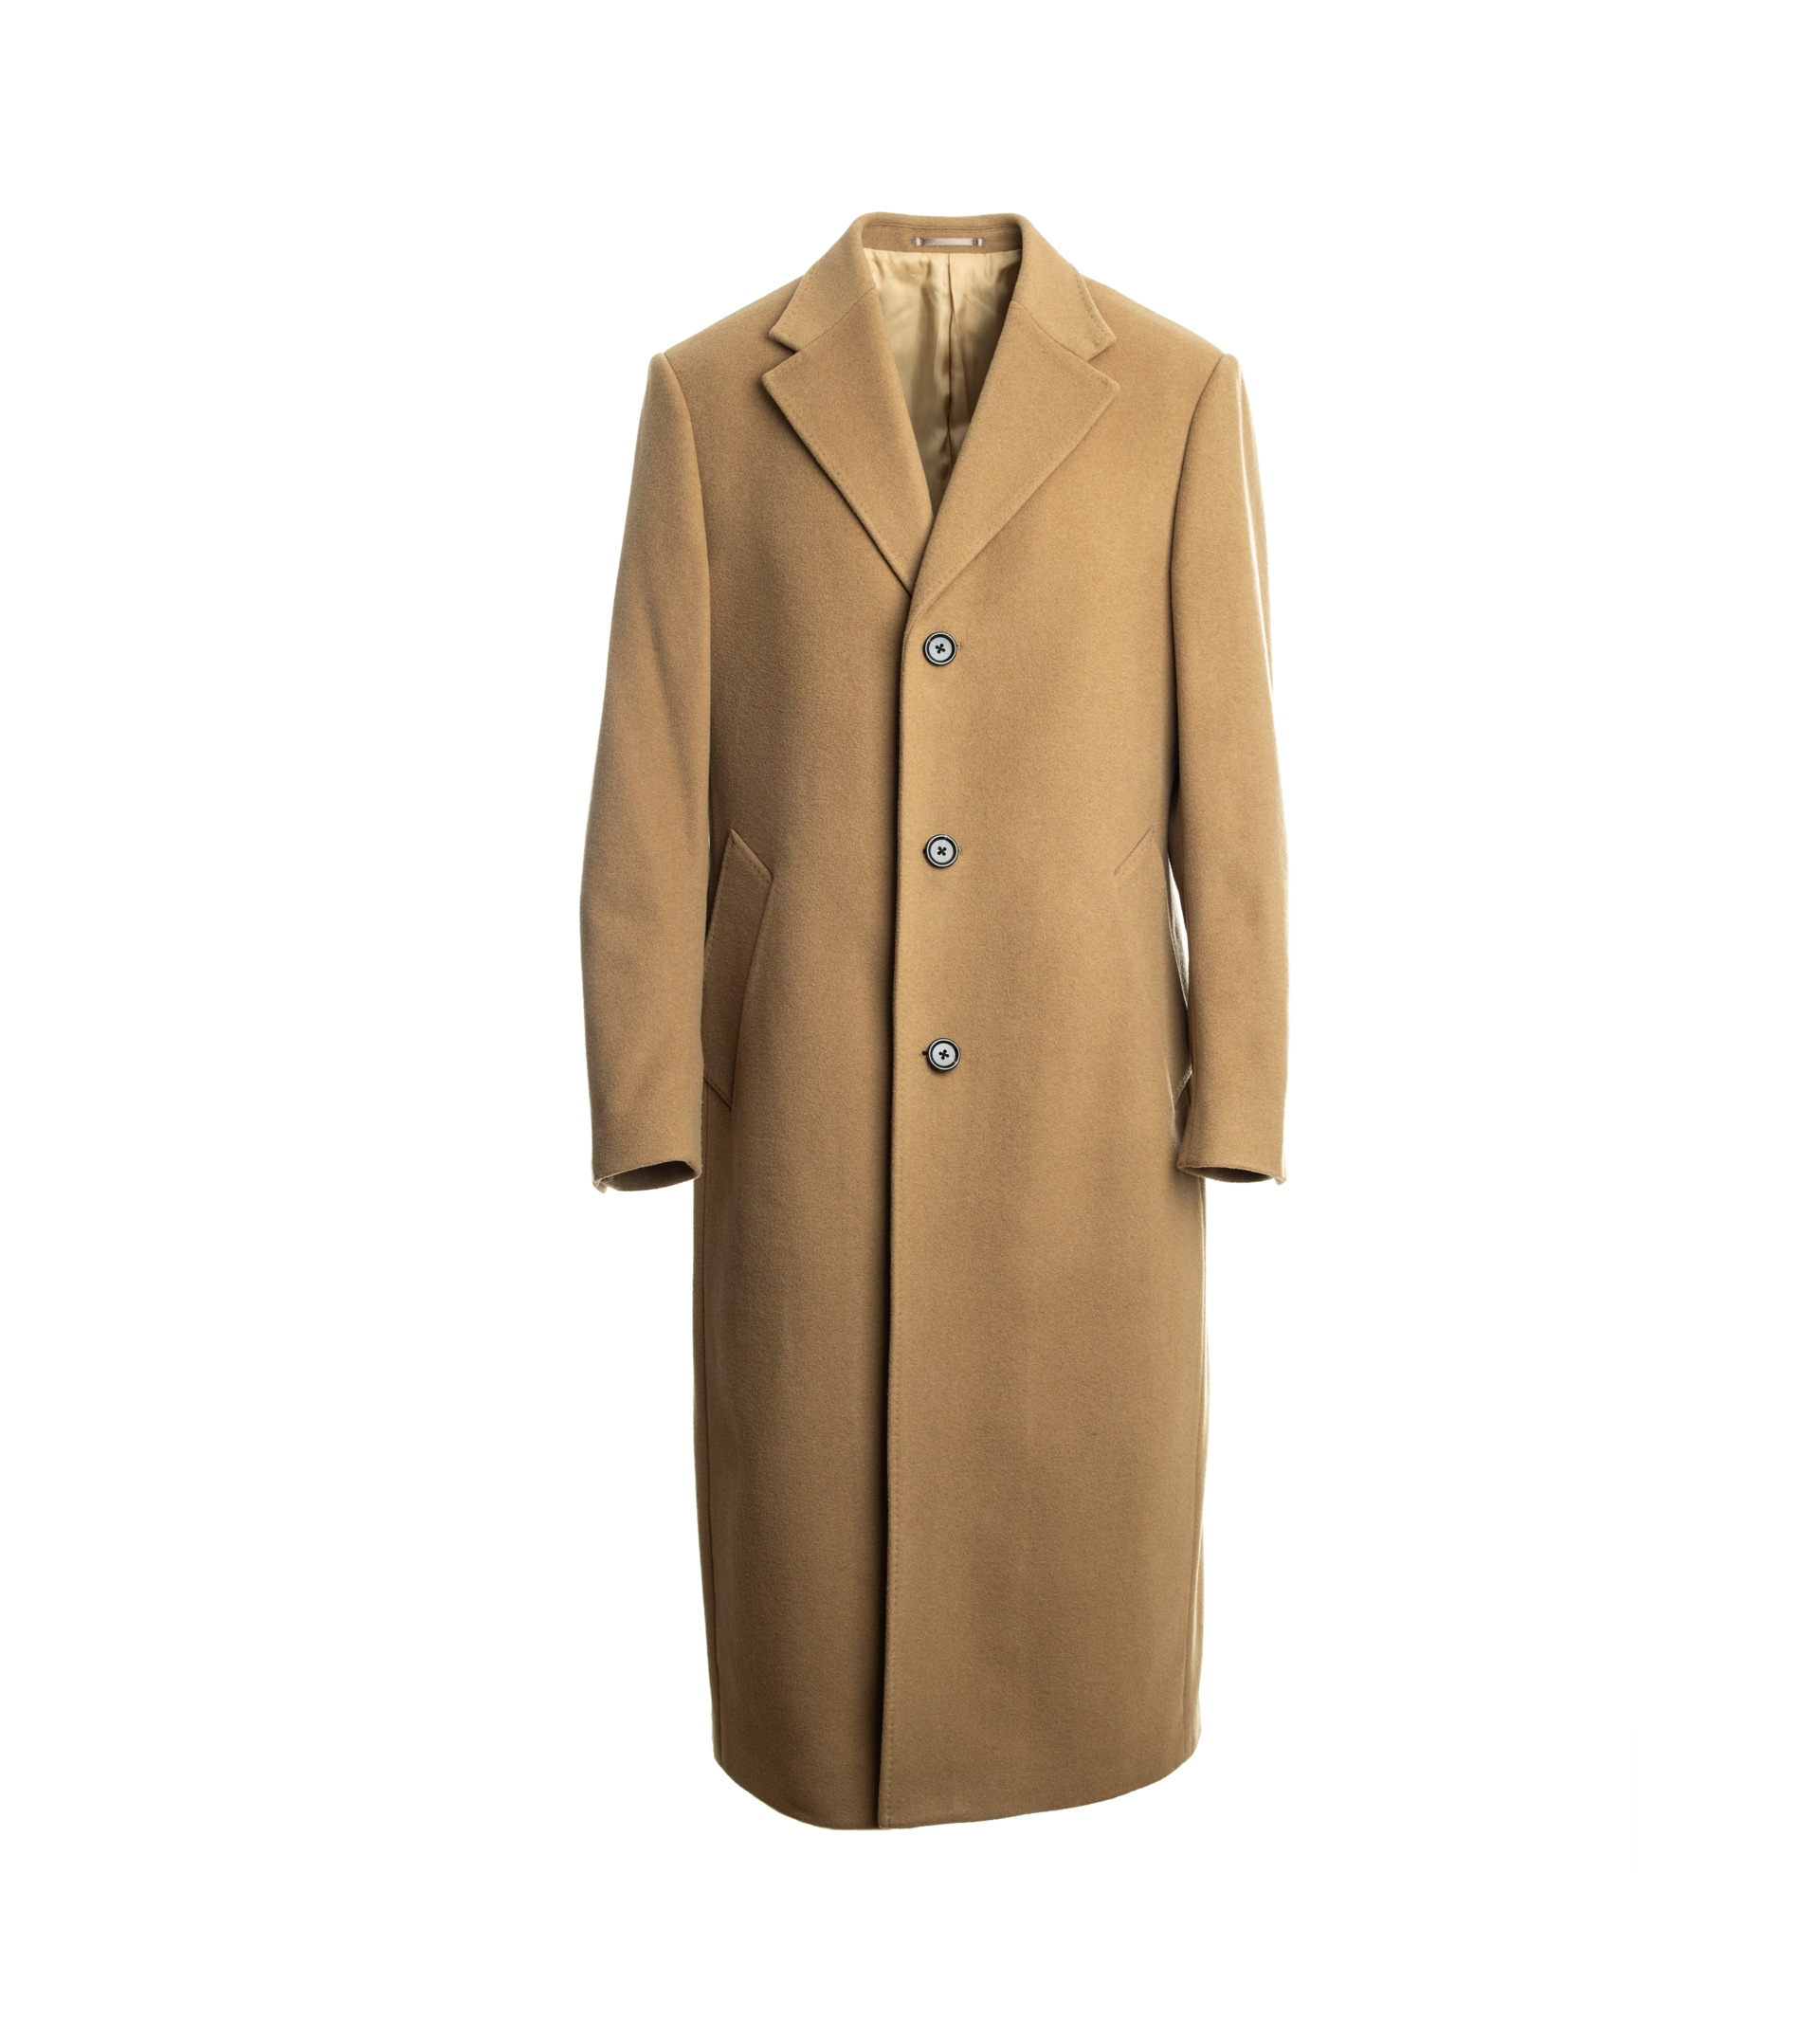 https://hespokestyle.com/wp-content/uploads/2023/08/camel-wool-cashmere-overcoat-he-spoke-style-shop-960x1074@2x.png